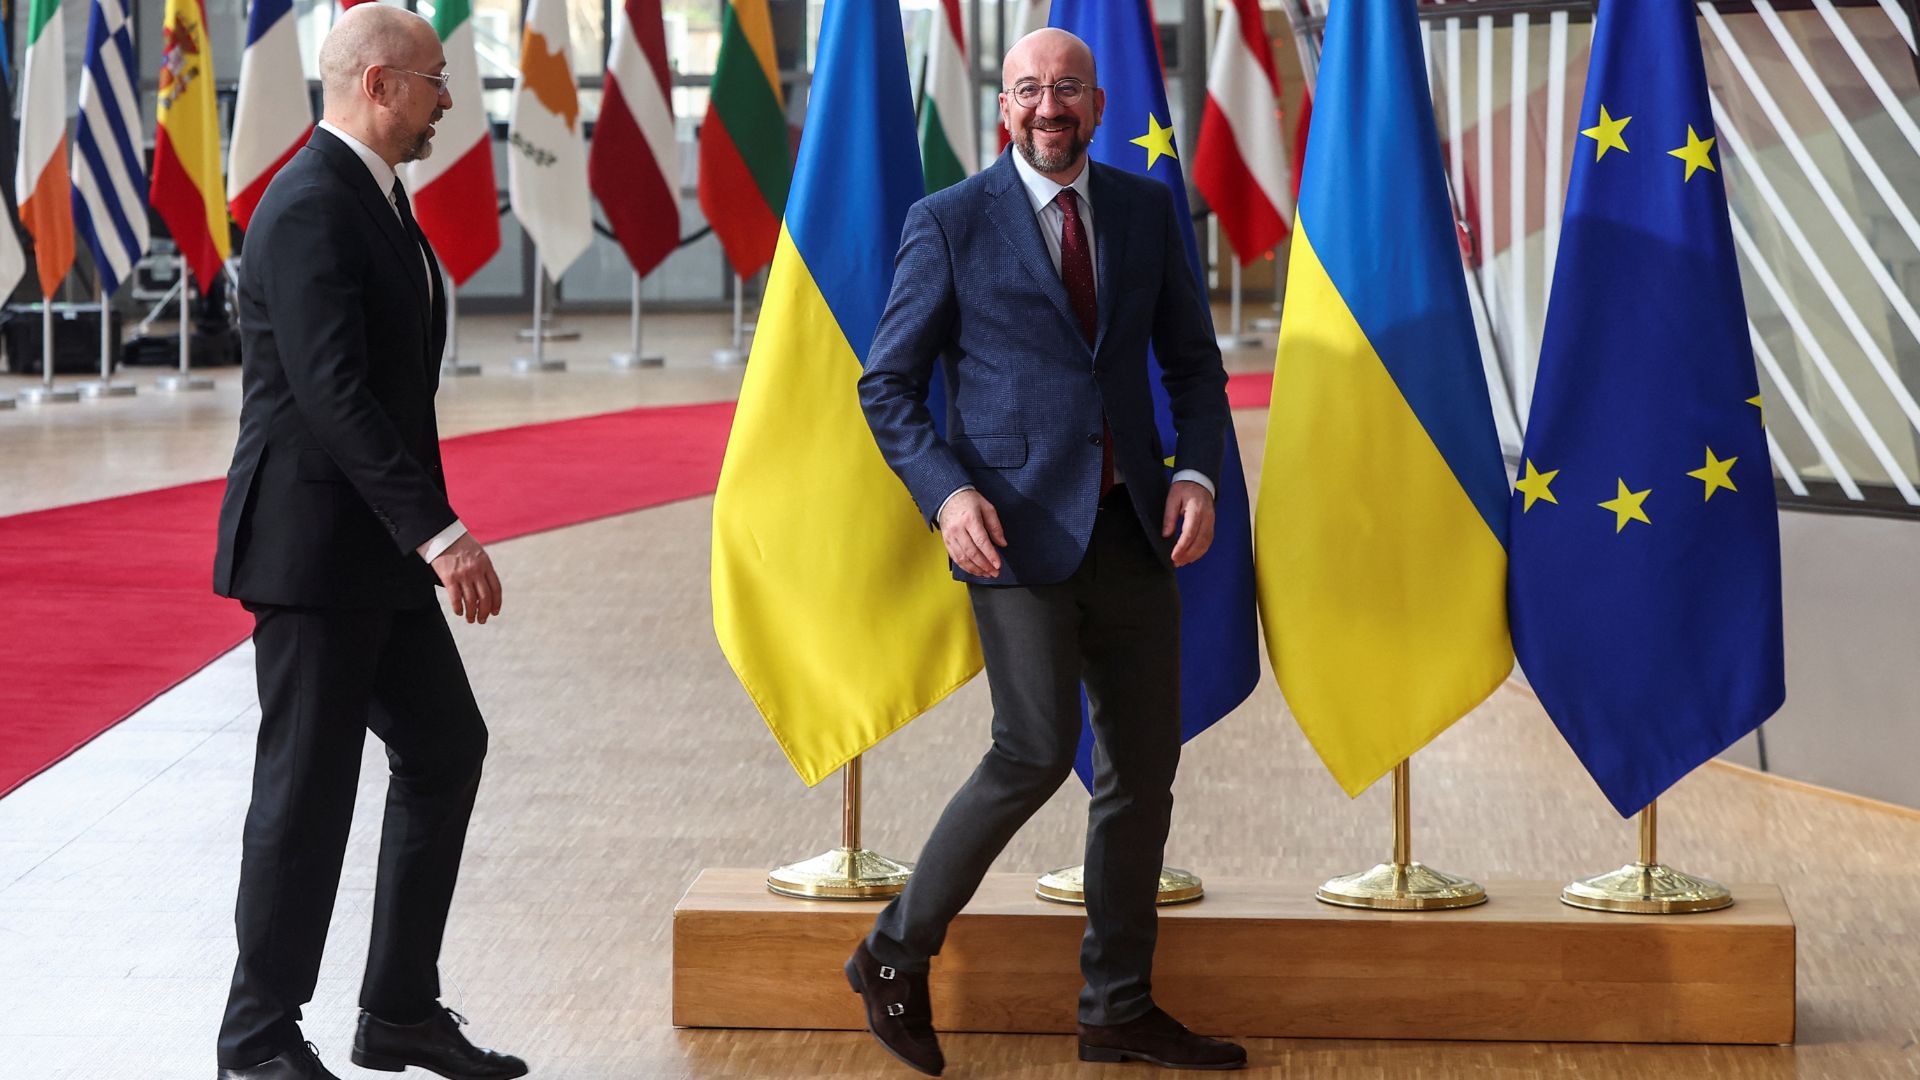 European Council President Charles Michel meets Ukraine's Prime Minister Denys Shmyhal on the day of the announcement. /Yves Herman/Reuters
